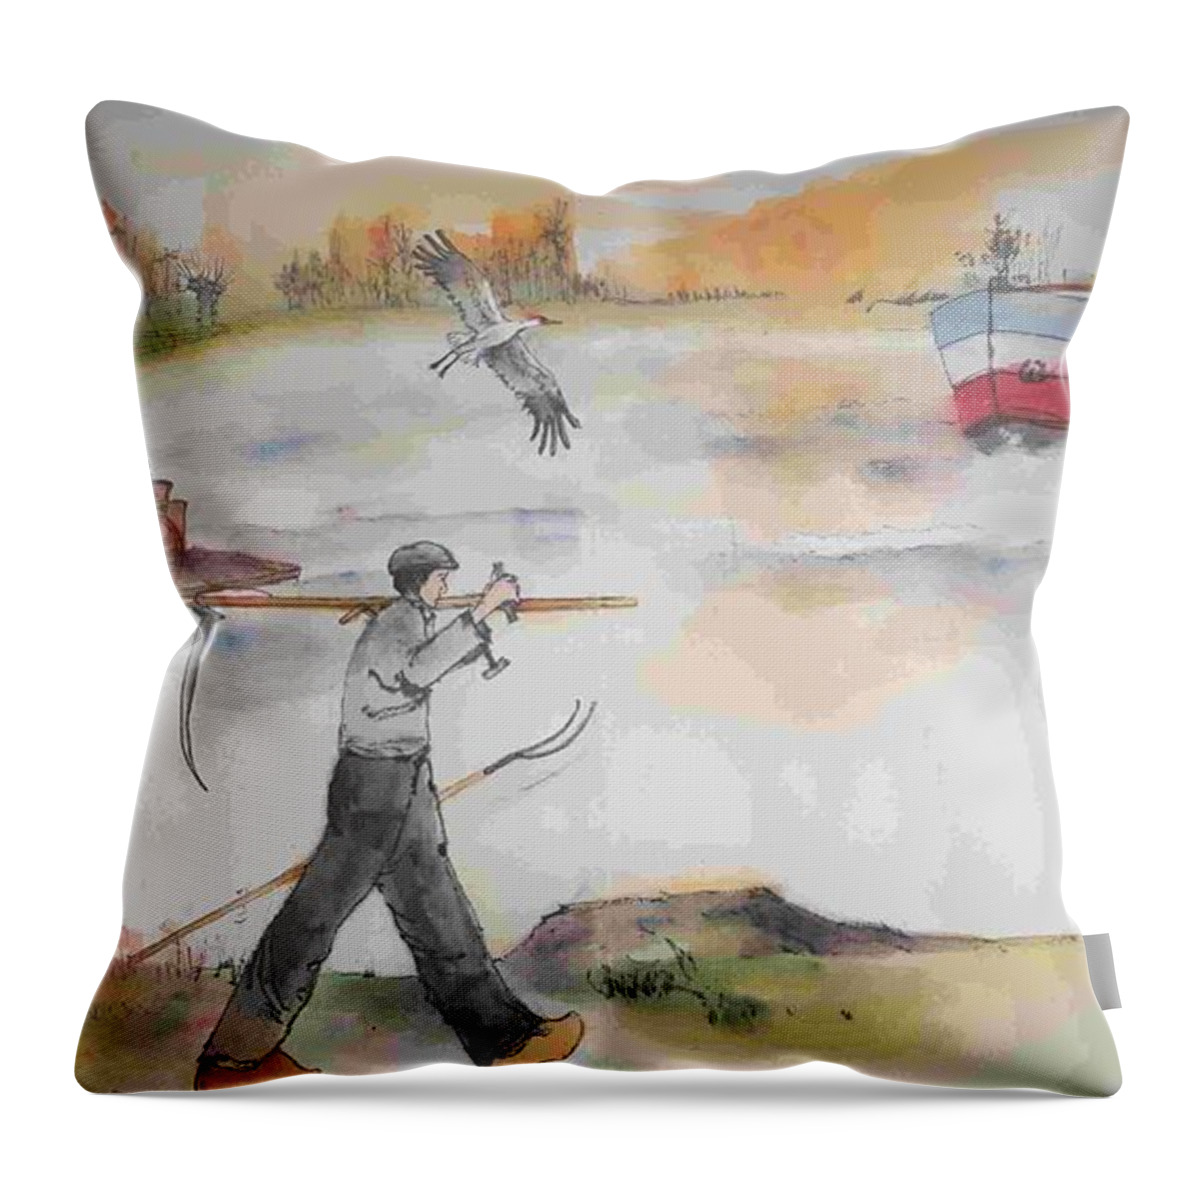 The Netherlands. Landscape. Barges. Horses. Throw Pillow featuring the painting Land of windmill clogs and tulips album #5 by Debbi Saccomanno Chan